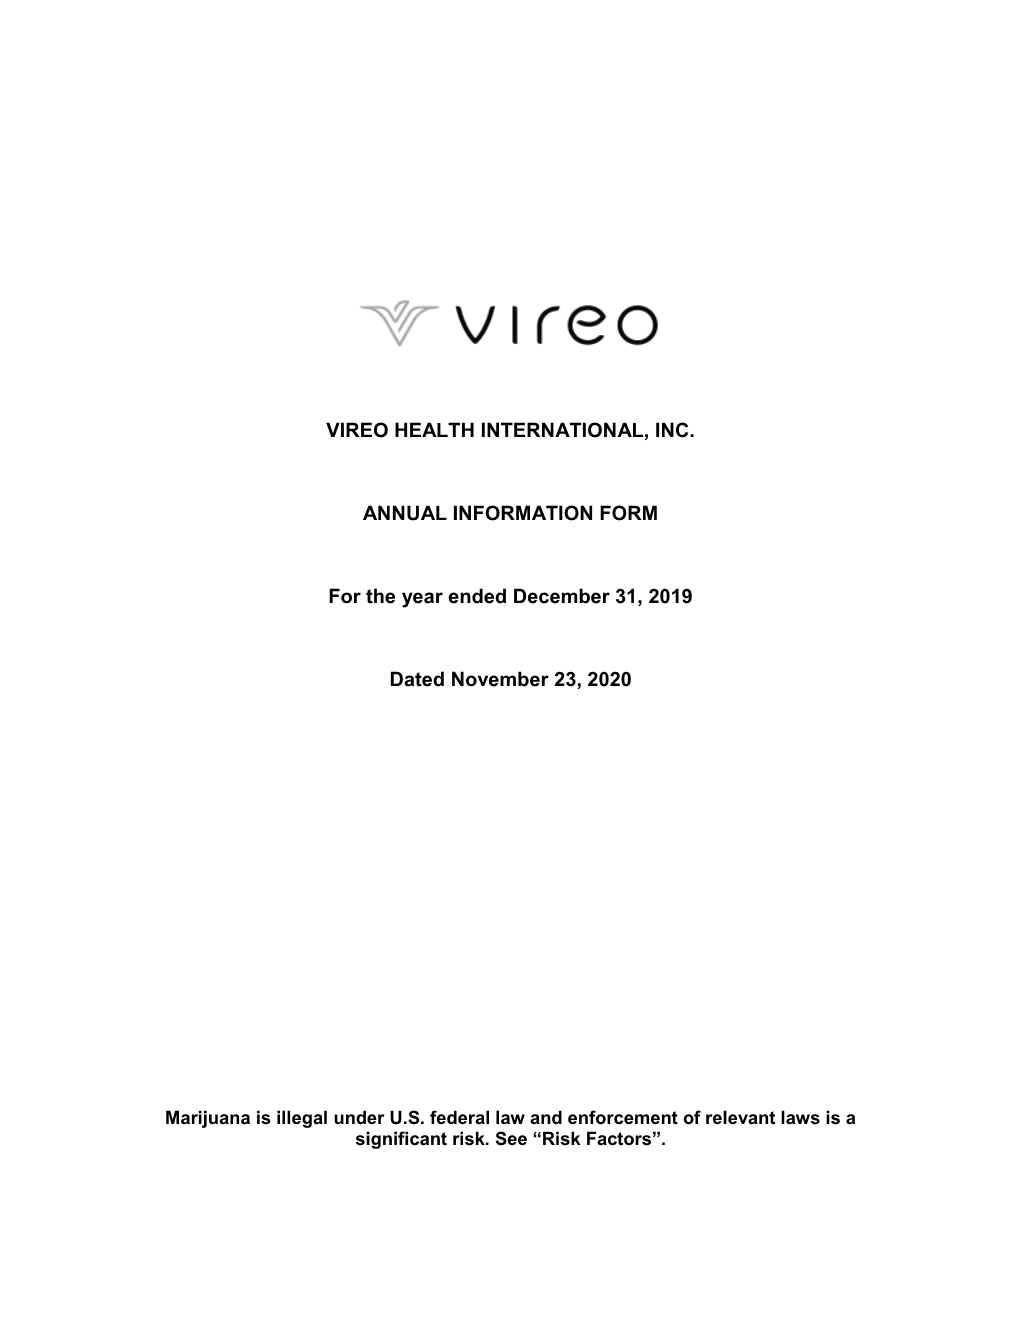 VIREO HEALTH INTERNATIONAL, INC. ANNUAL INFORMATION FORM for the Year Ended December 31, 2019 Dated November 23, 2020